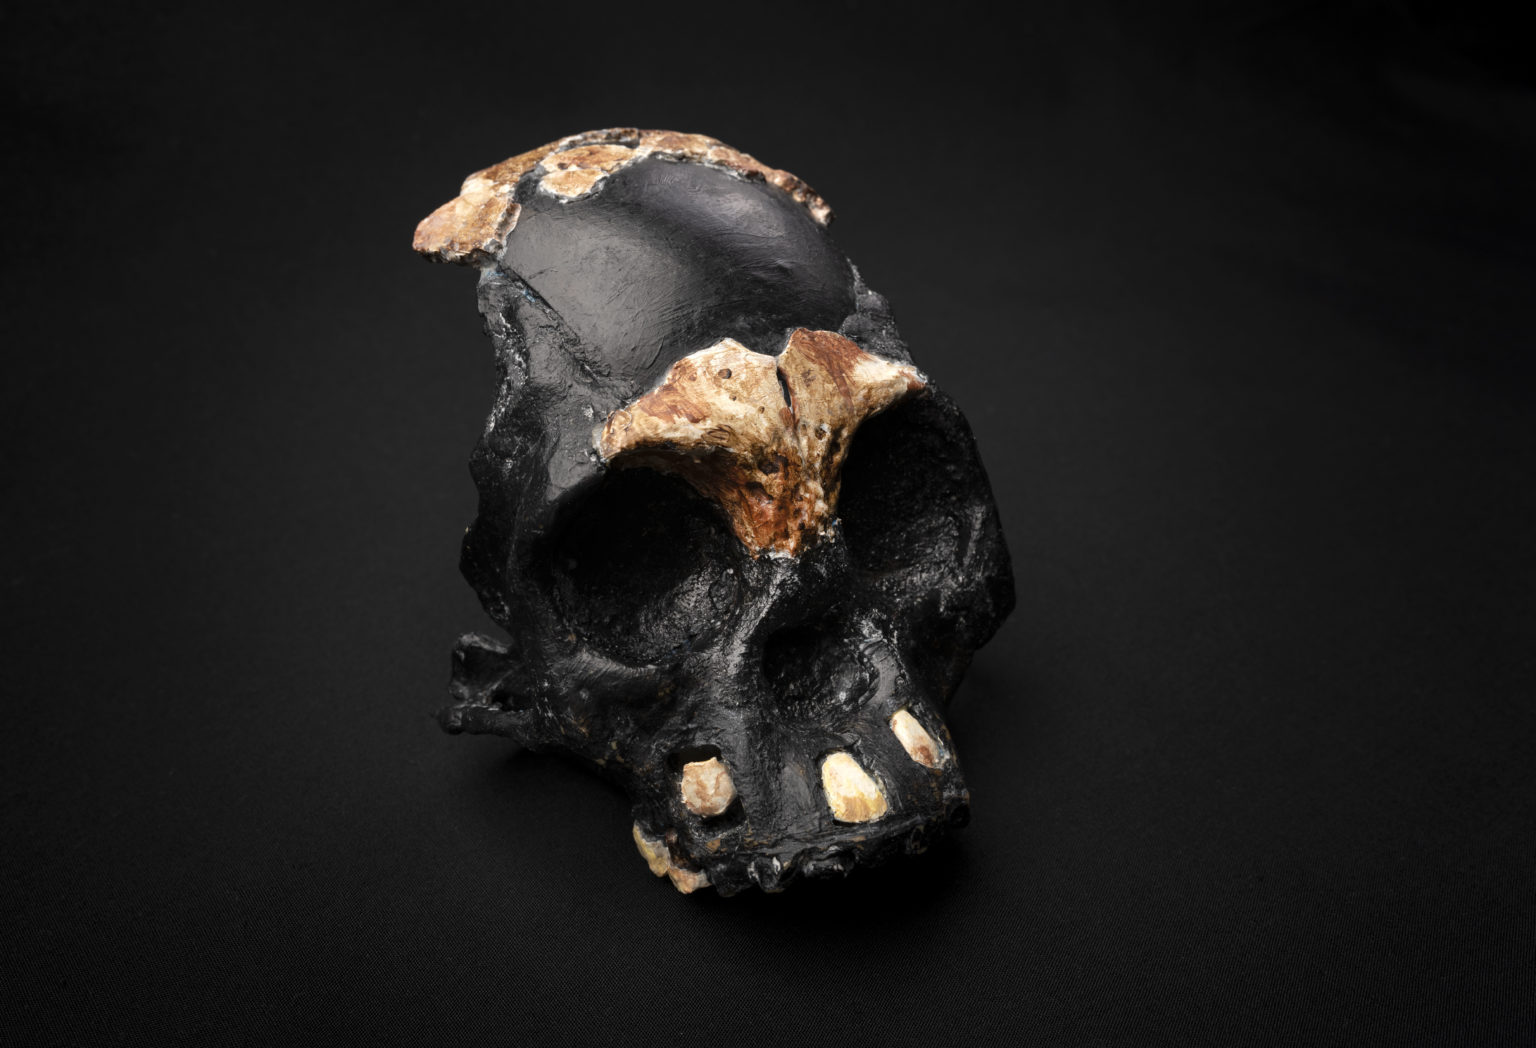 A fossilized partial skull with a couple teeth still intact.